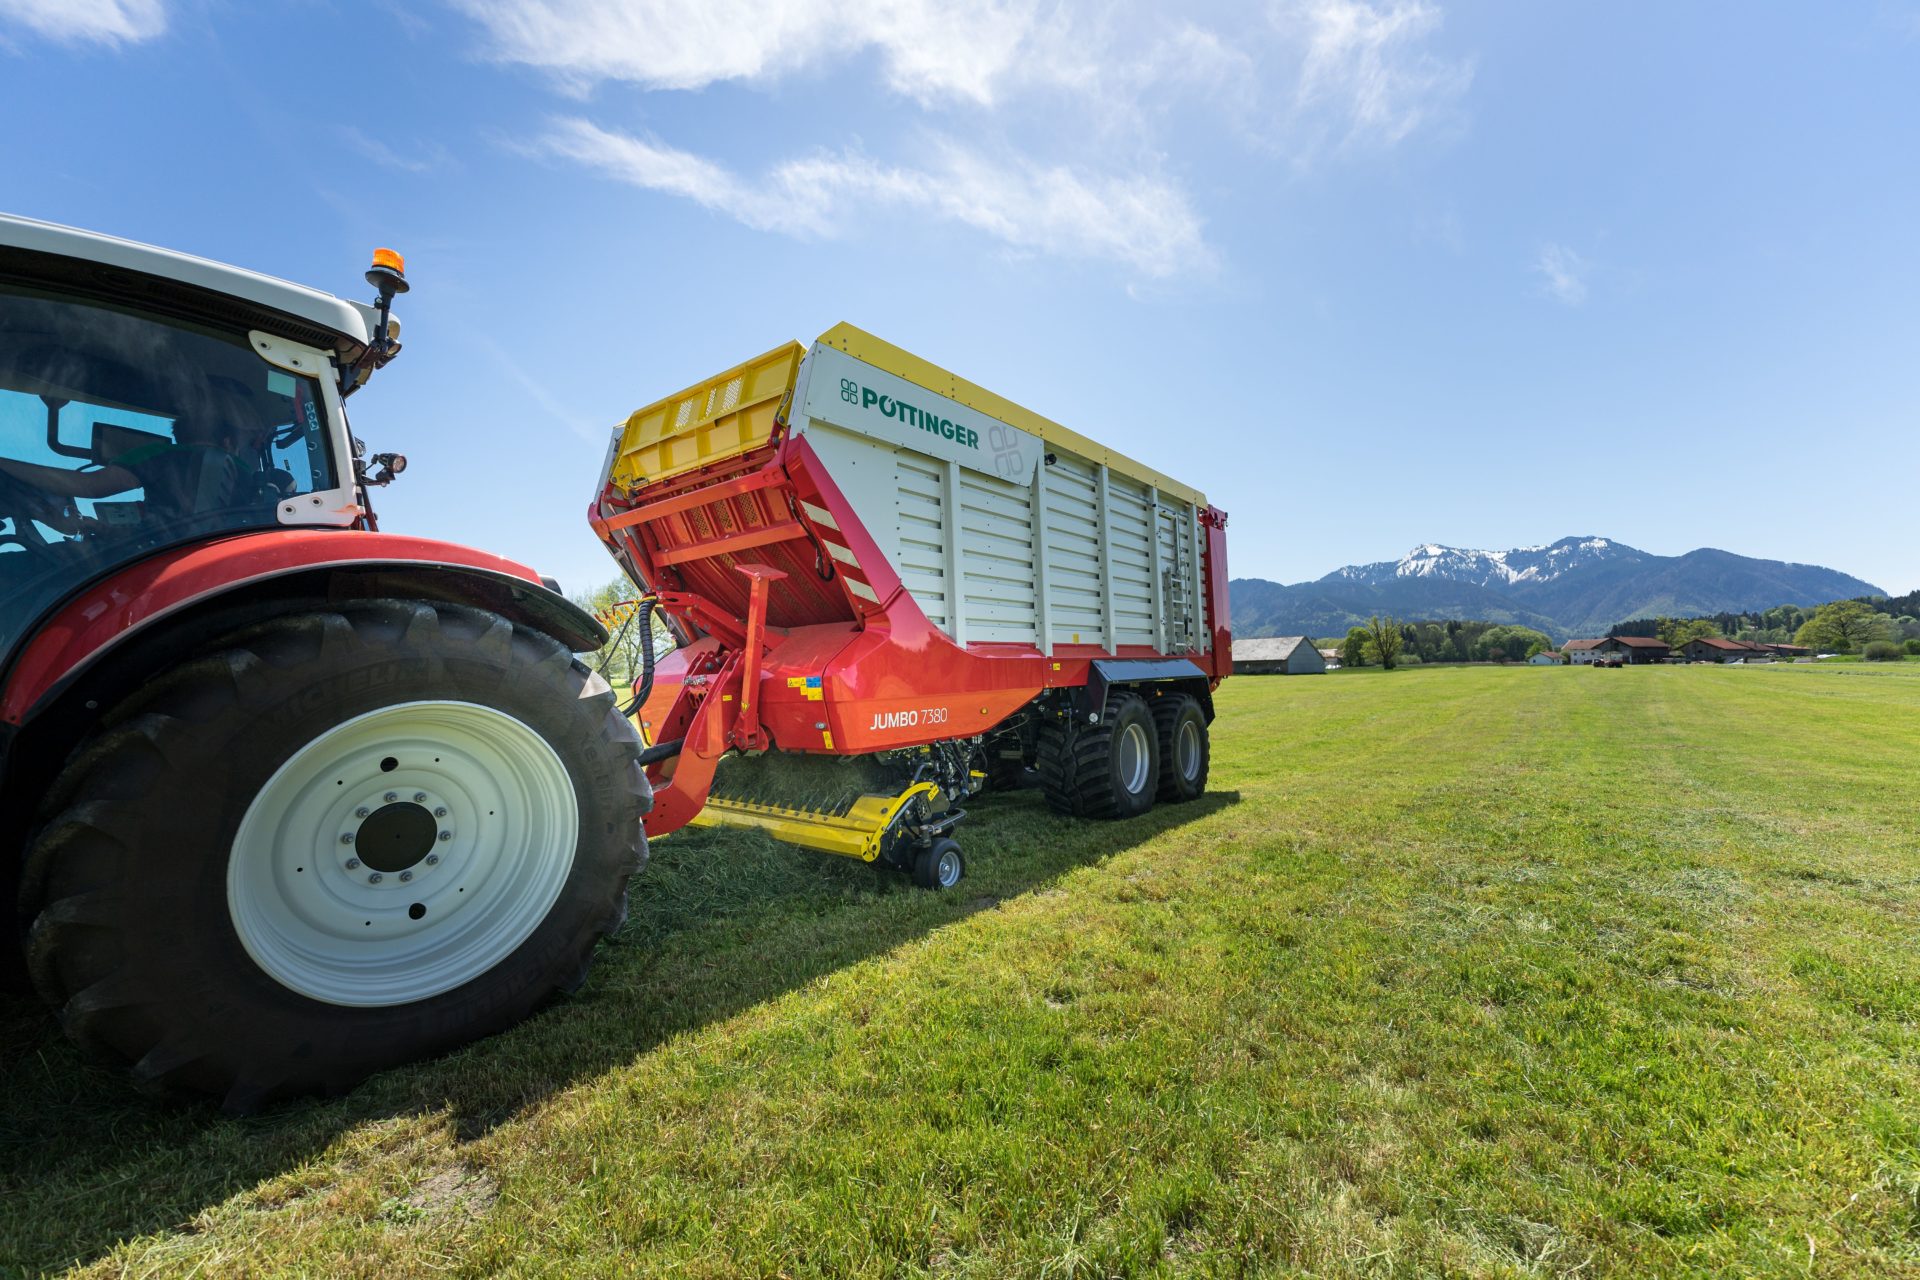 The new dimension in high-performance loader wagons